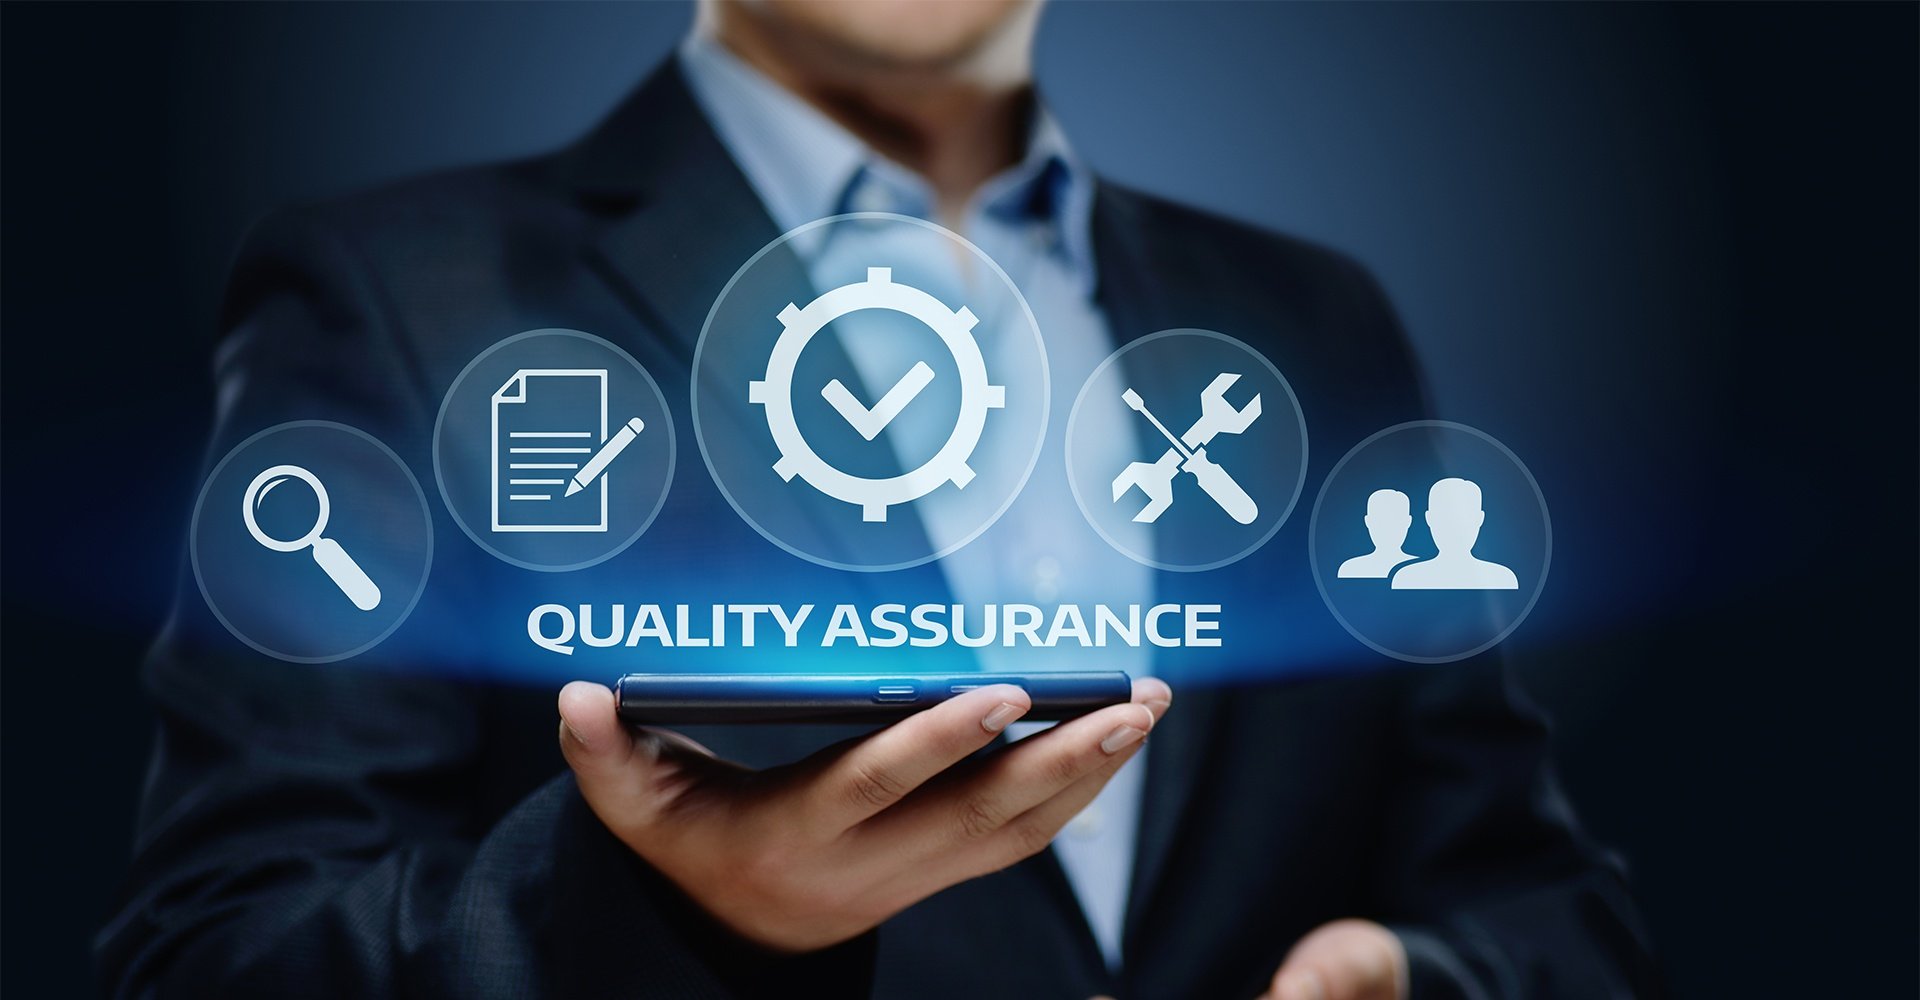 6_14 - How Outsourcing Your Quality Assurance Can Help Your Project - Featured